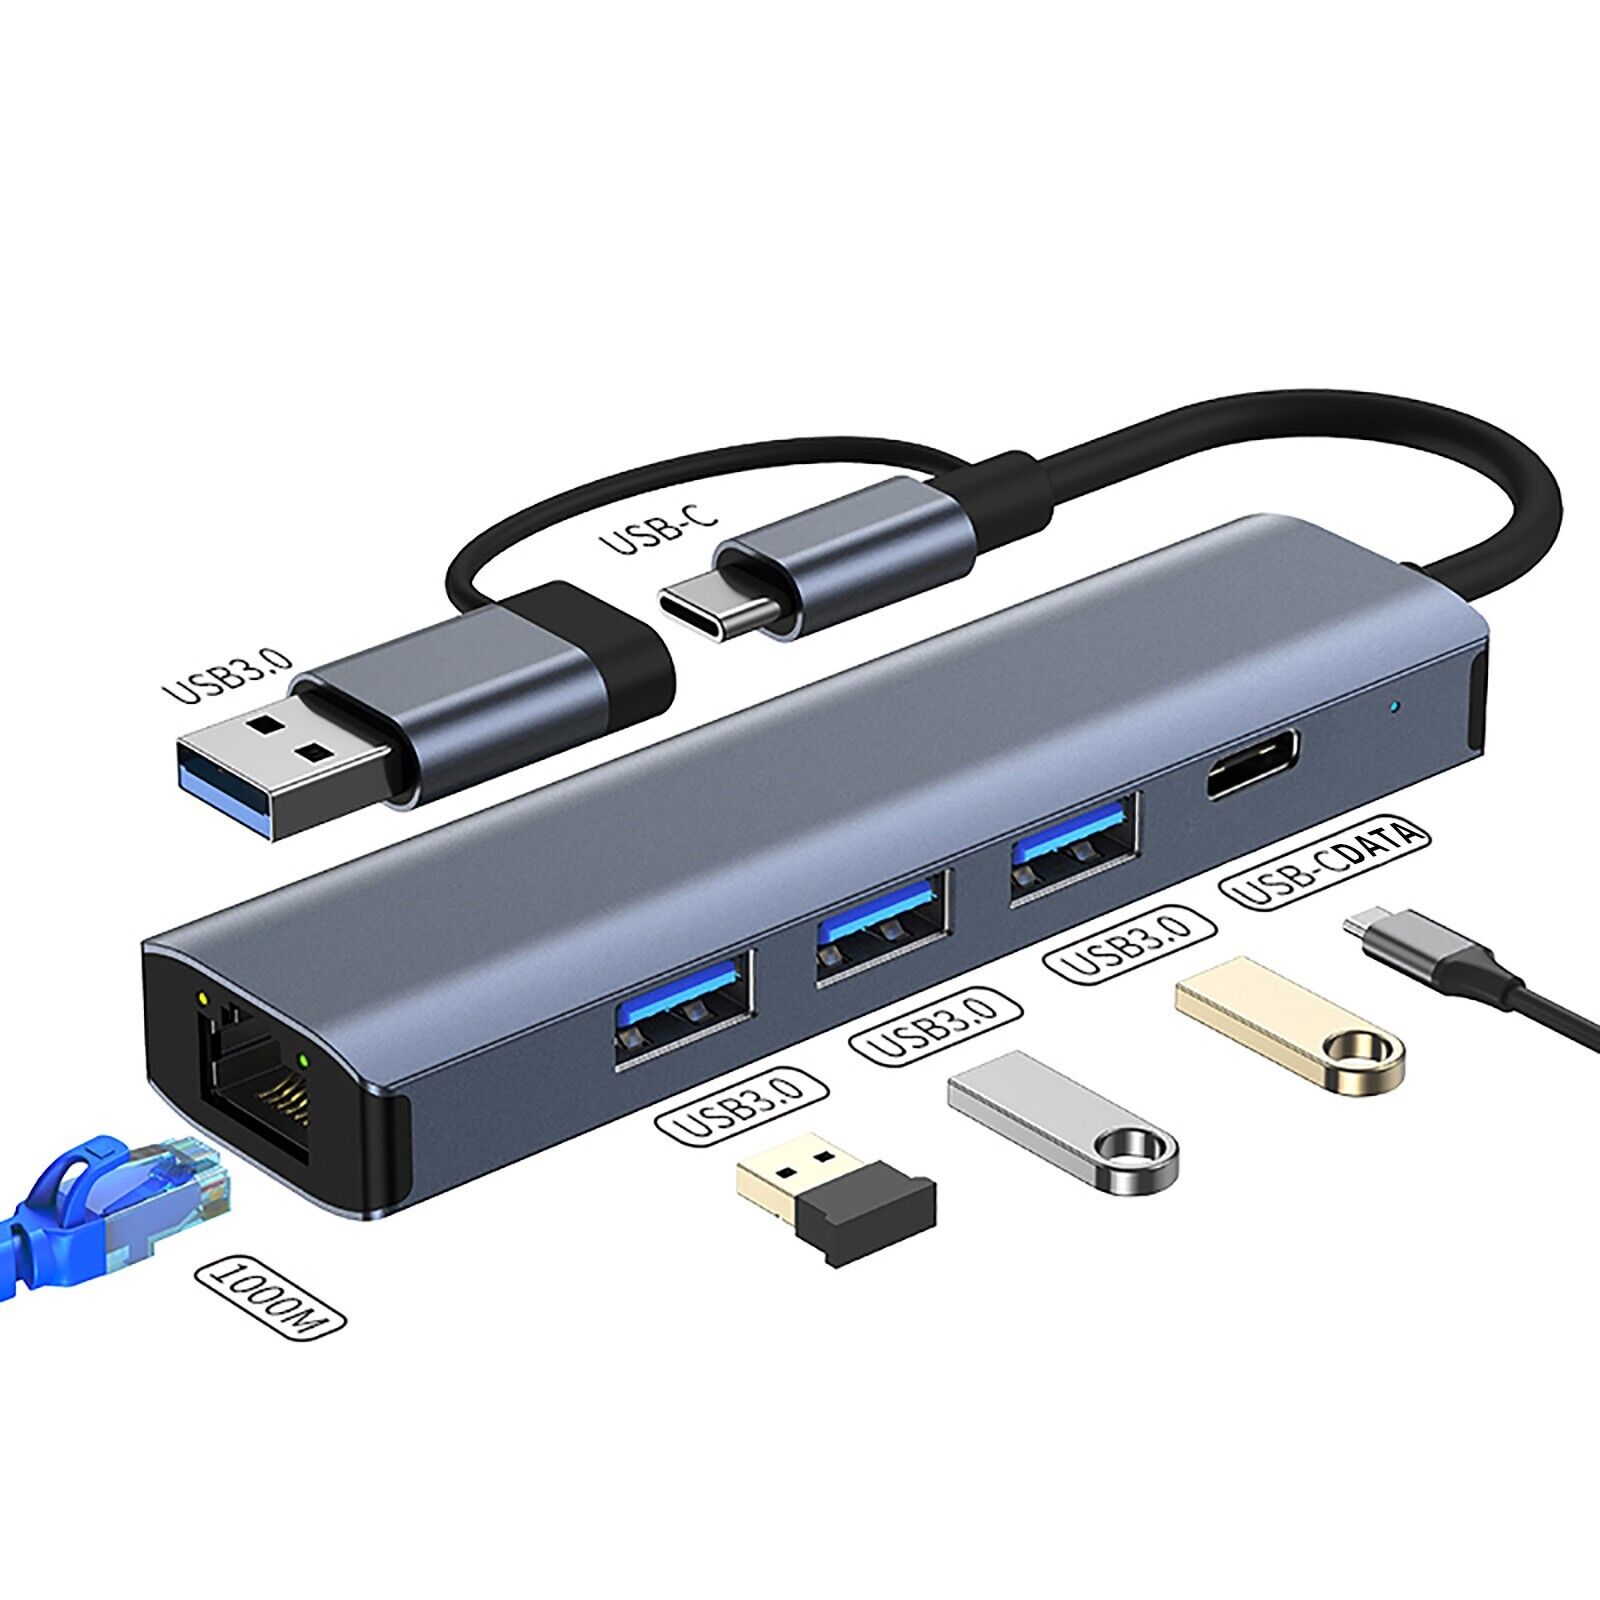 USB 3.0 To Ethernet Adapter 5 In 1 Multiport Hub With Gigabit And Type-C Laptop